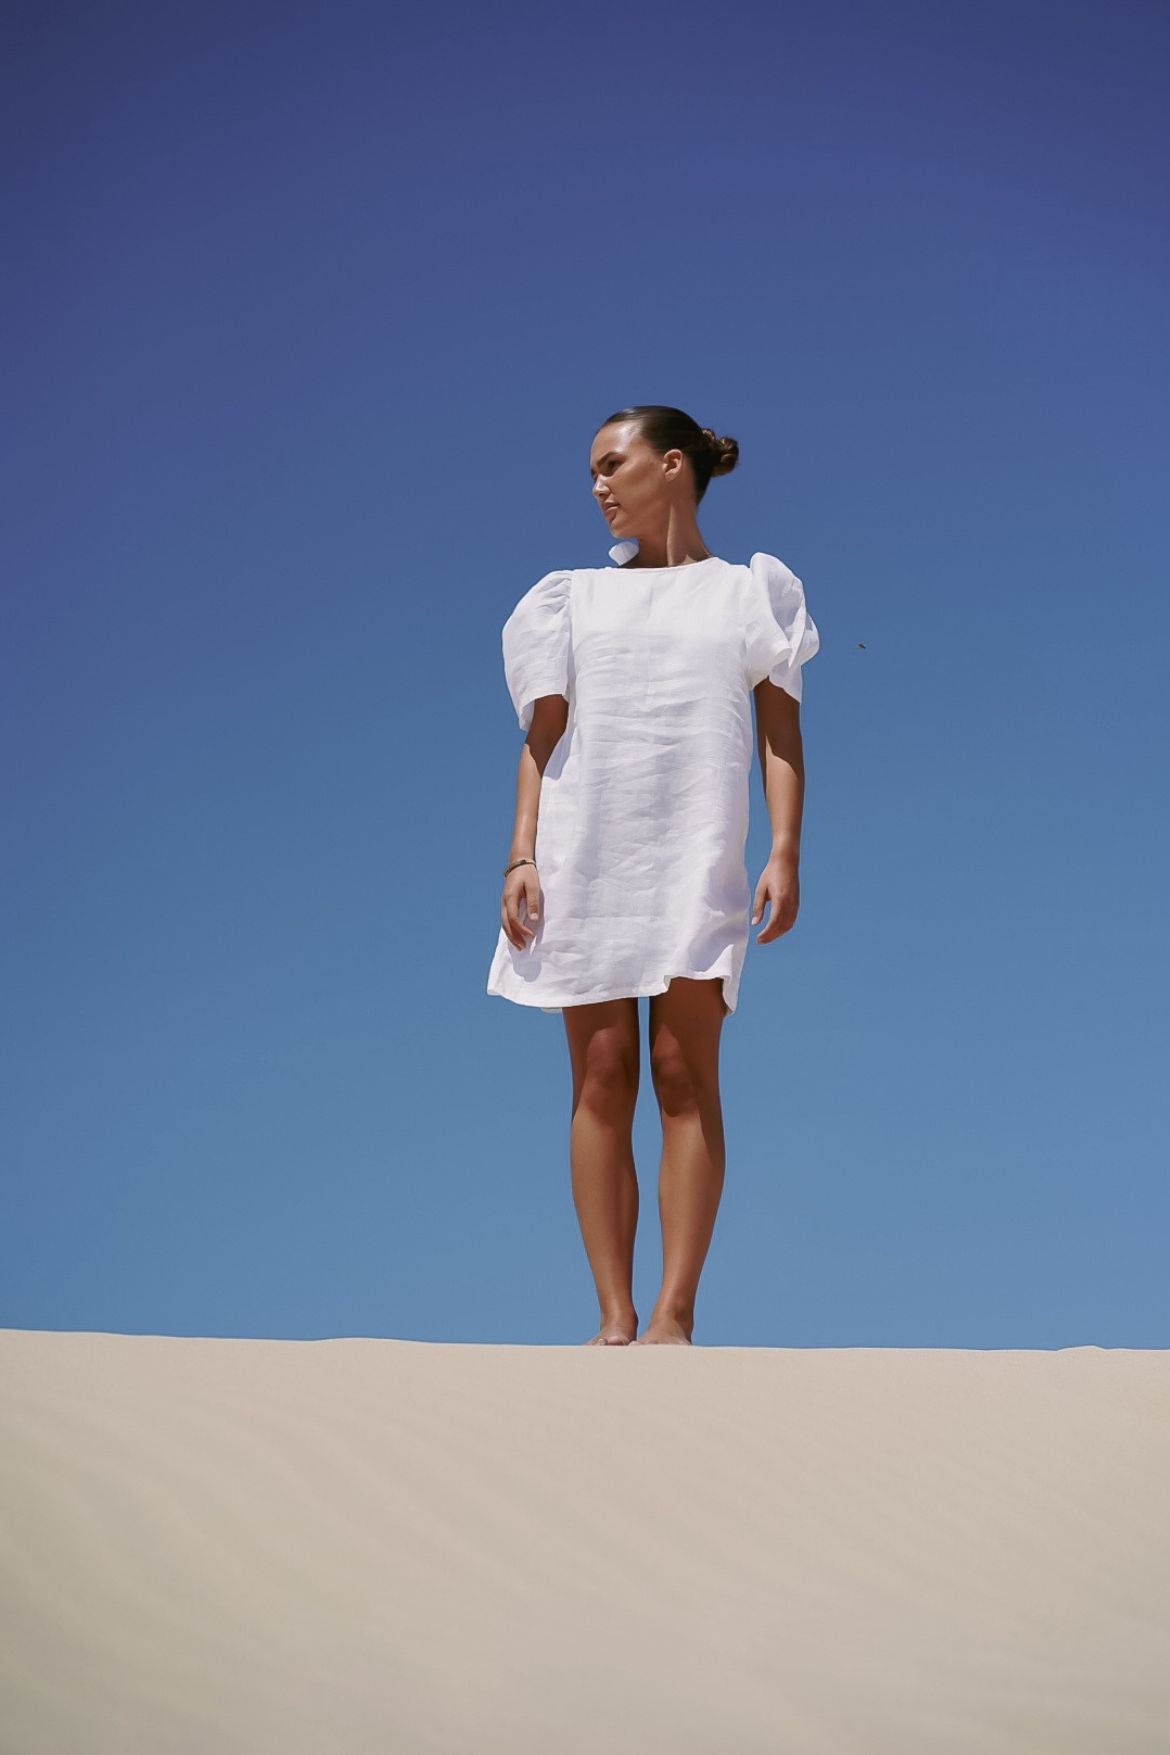 The Ease Florence Mini Dress - White linen mini dress with exaggerated sleeve and tie back